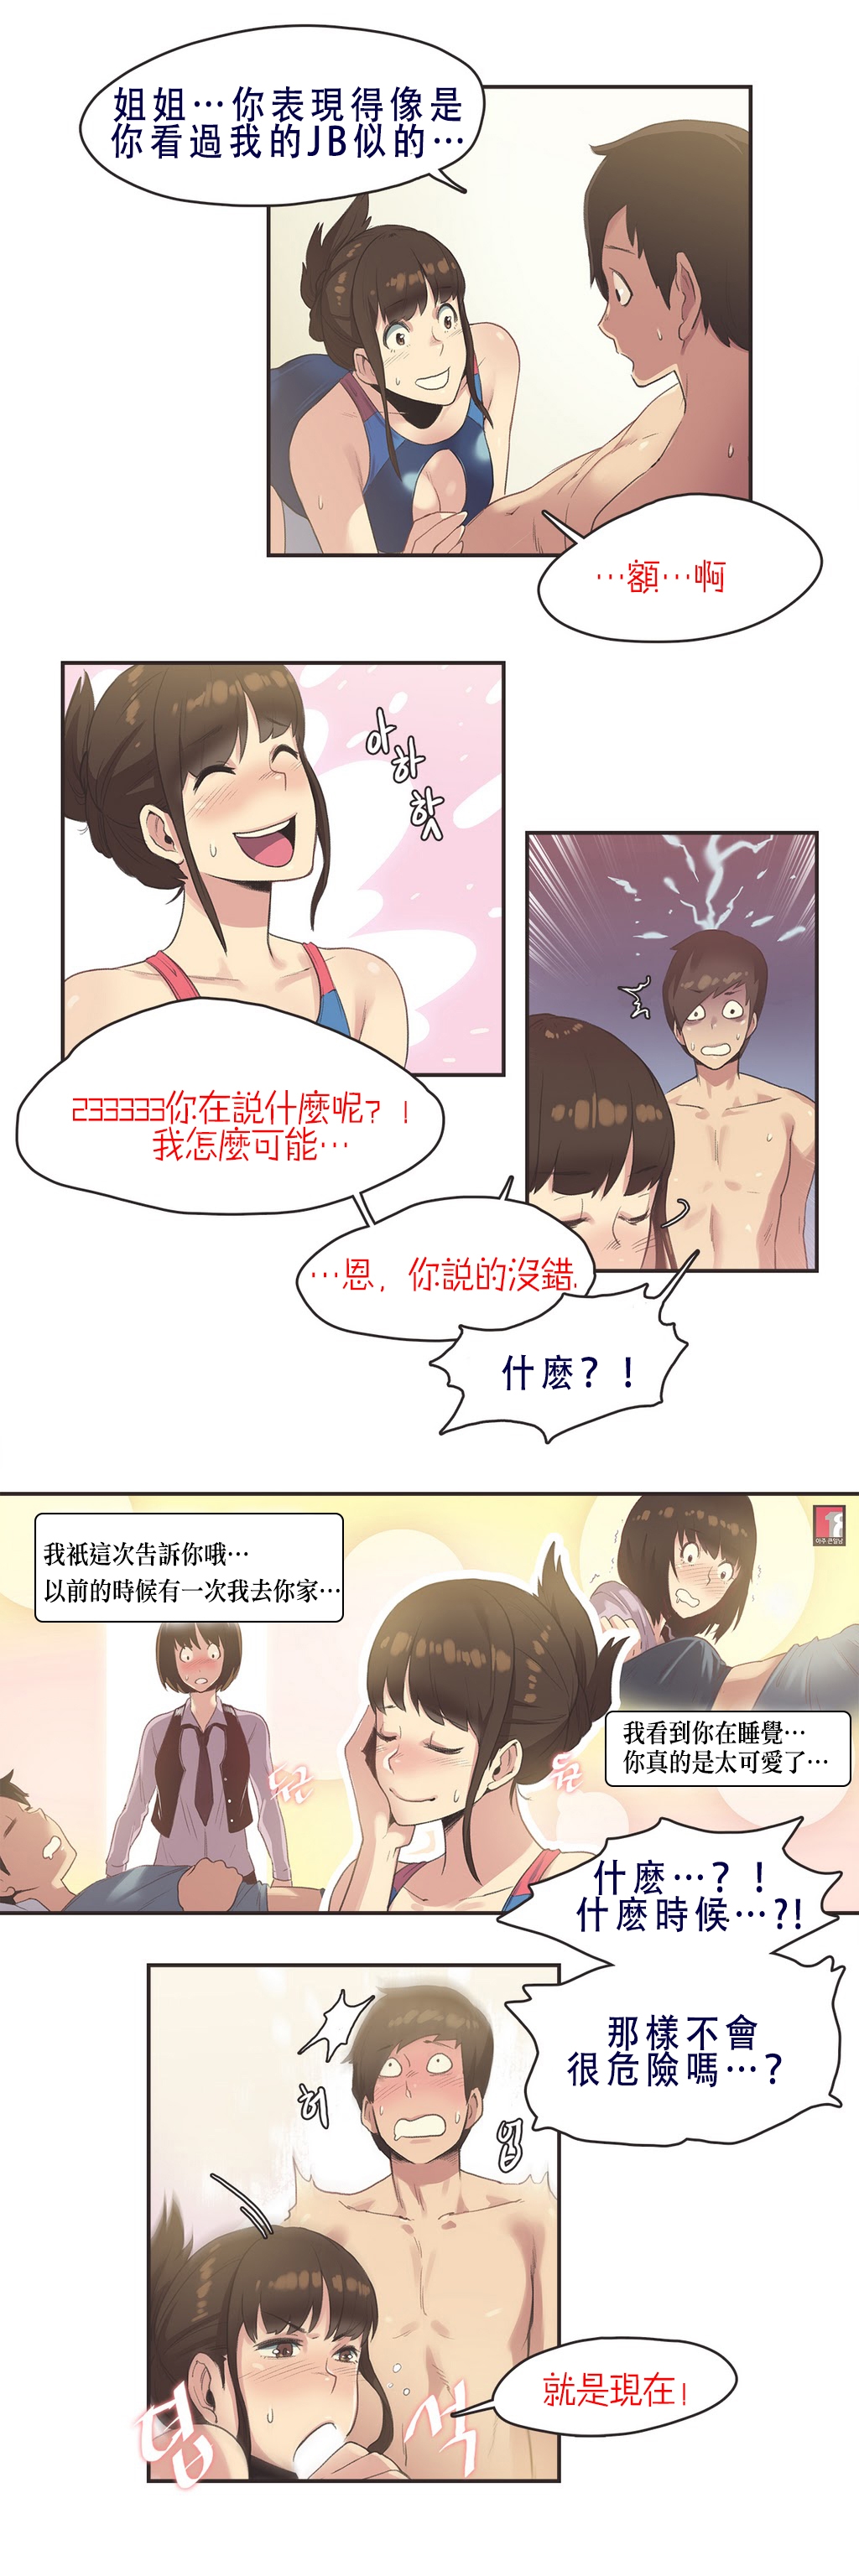 [Gamang] Sports Girl Ch.7 [Chinese] [高麗個人漢化] 10